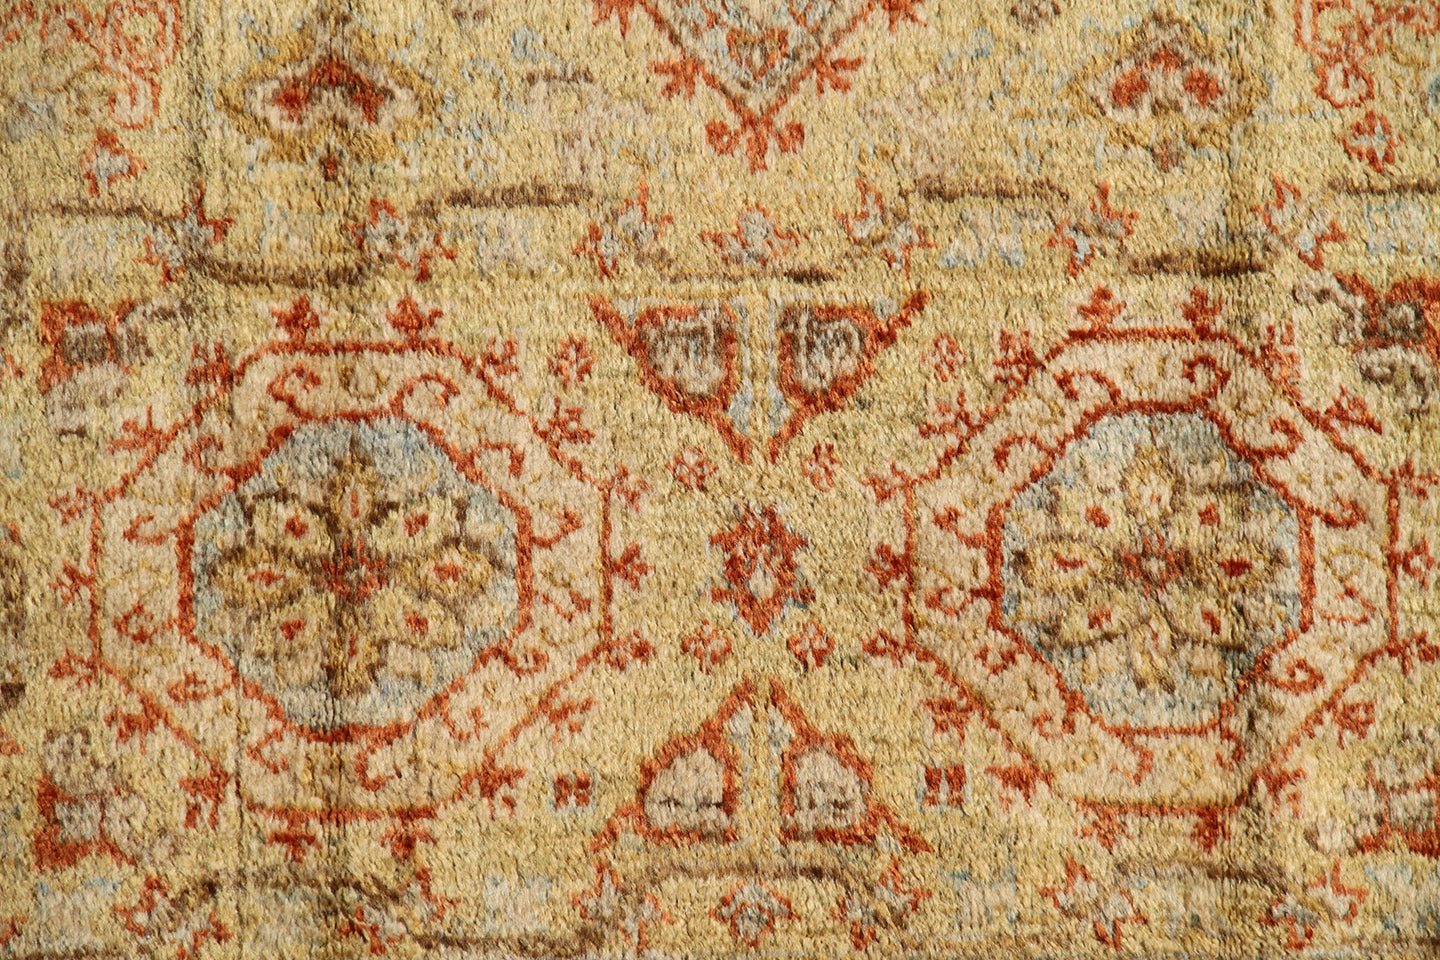 4'x6' Oushak Style Ariana Traditional Small Rug